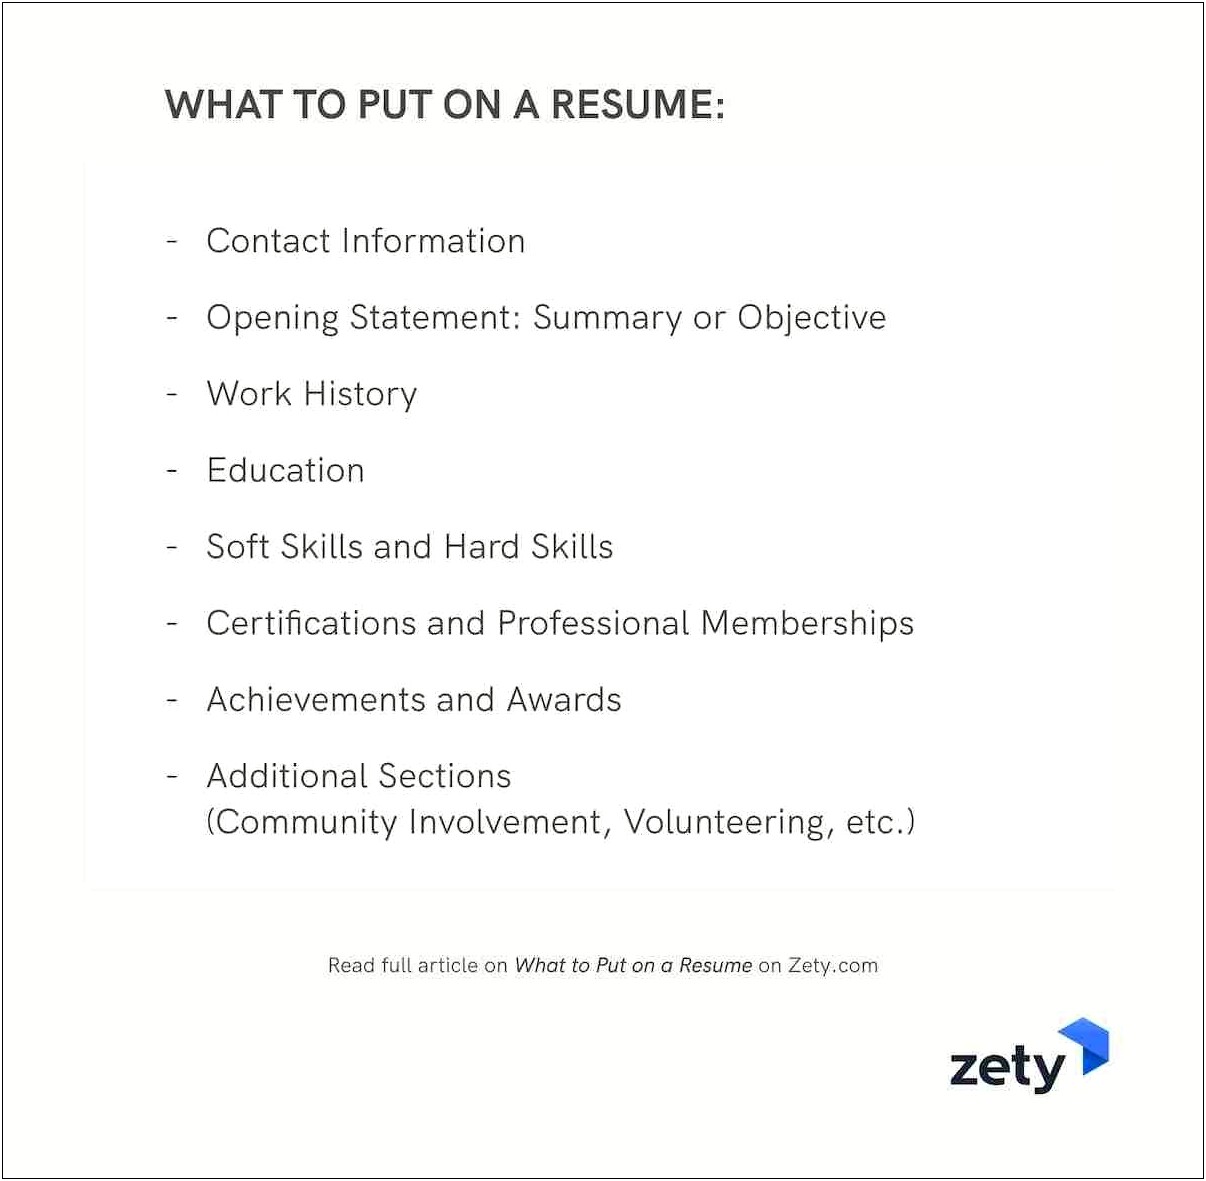 10 Things To Not Put On A Resume